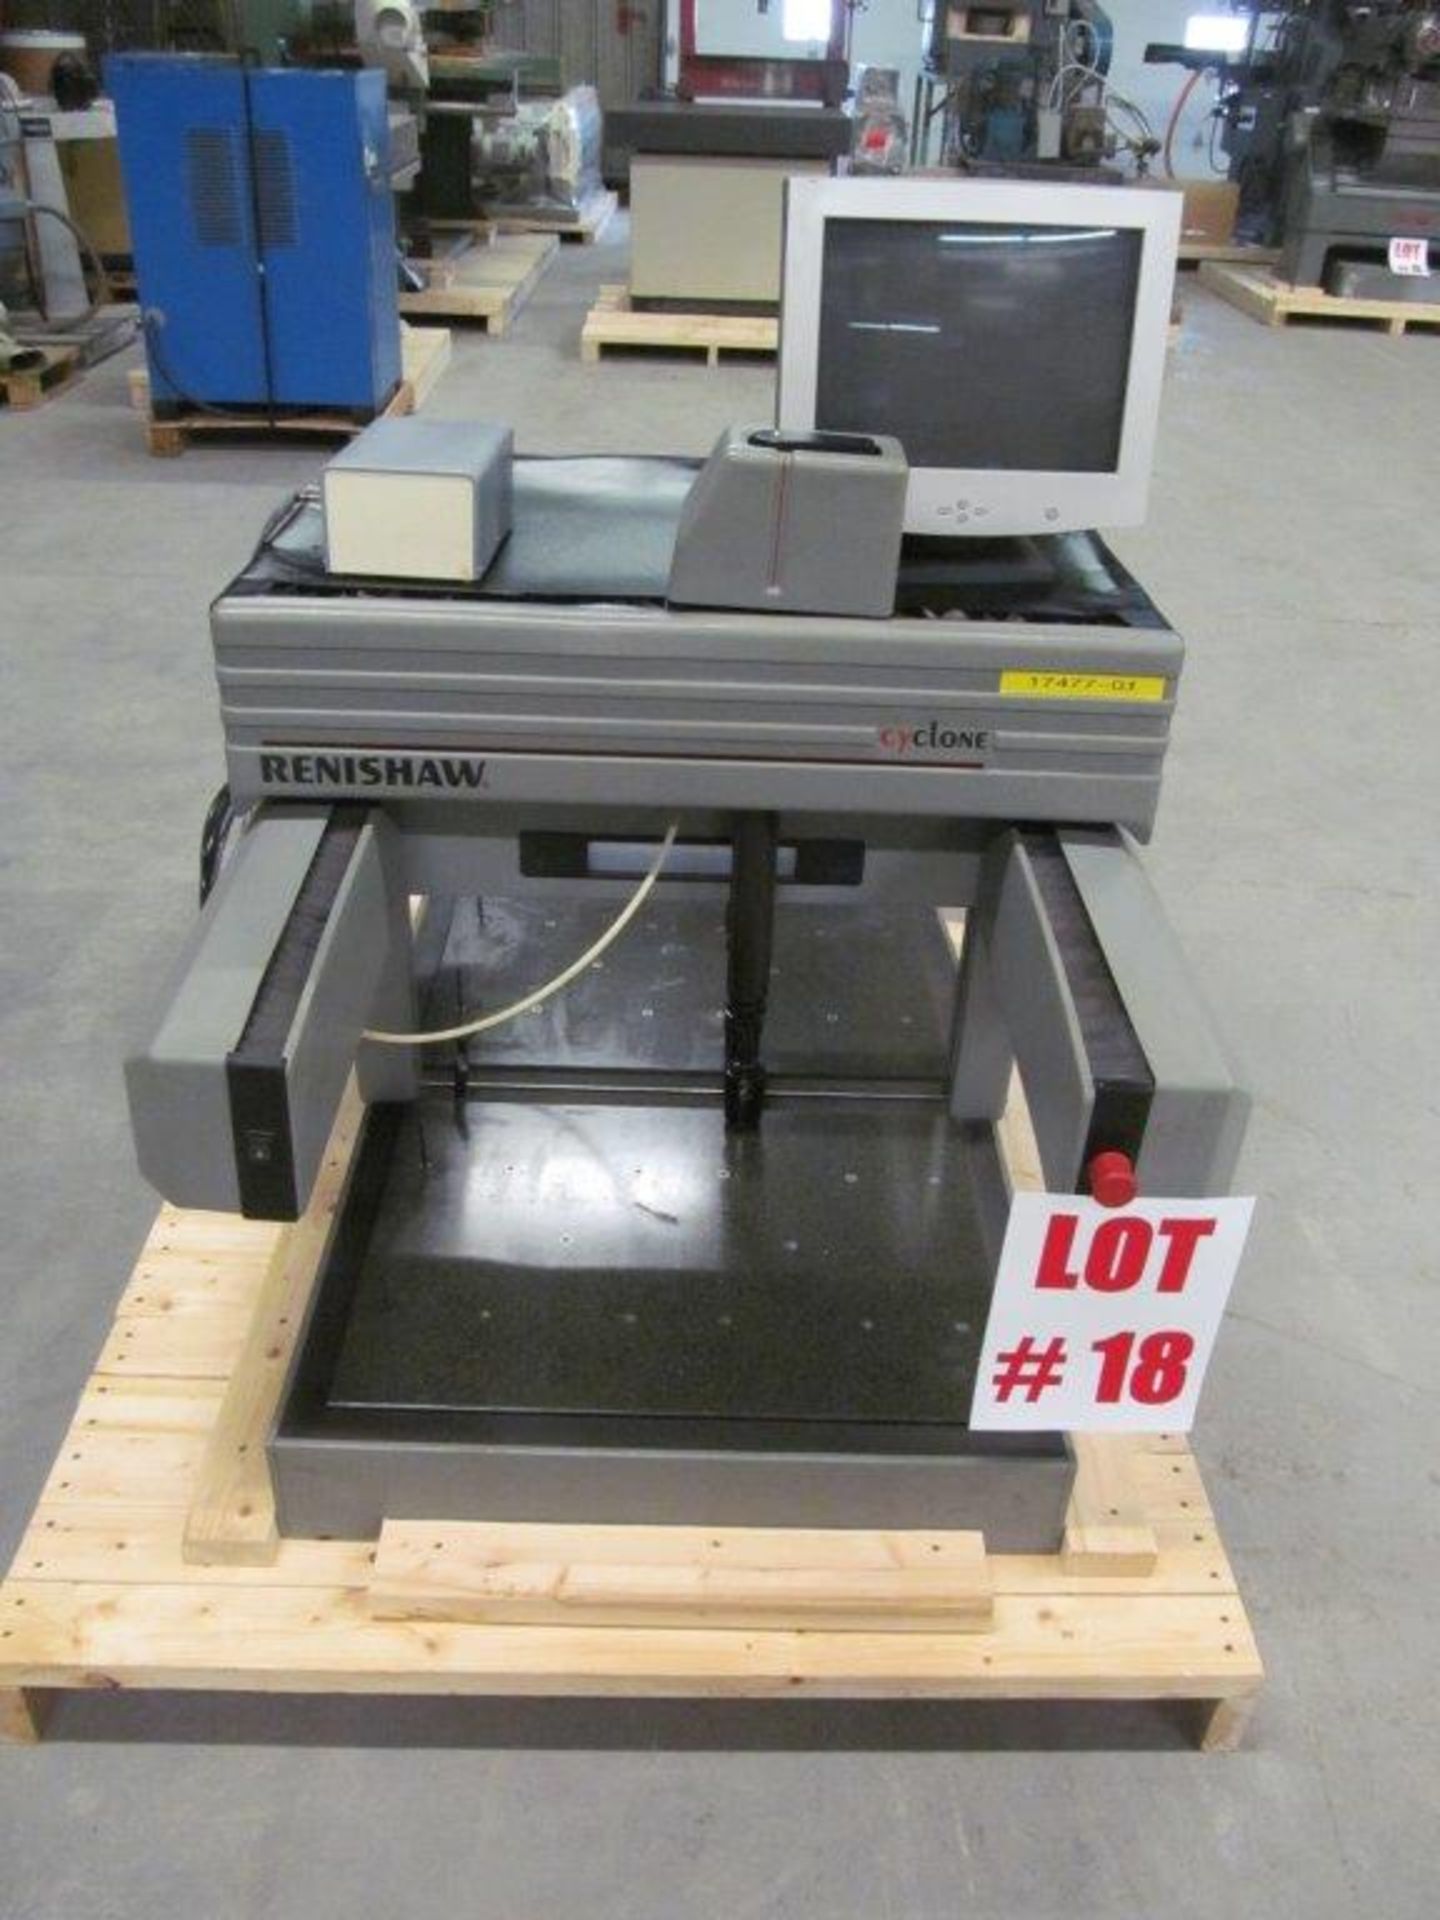 RENISHAW CYCLONE (ENGLAND) HIGH PRECISION PROBE MACHINE, S/N: Q29728, CONDITION UNKNOWN - Image 2 of 9